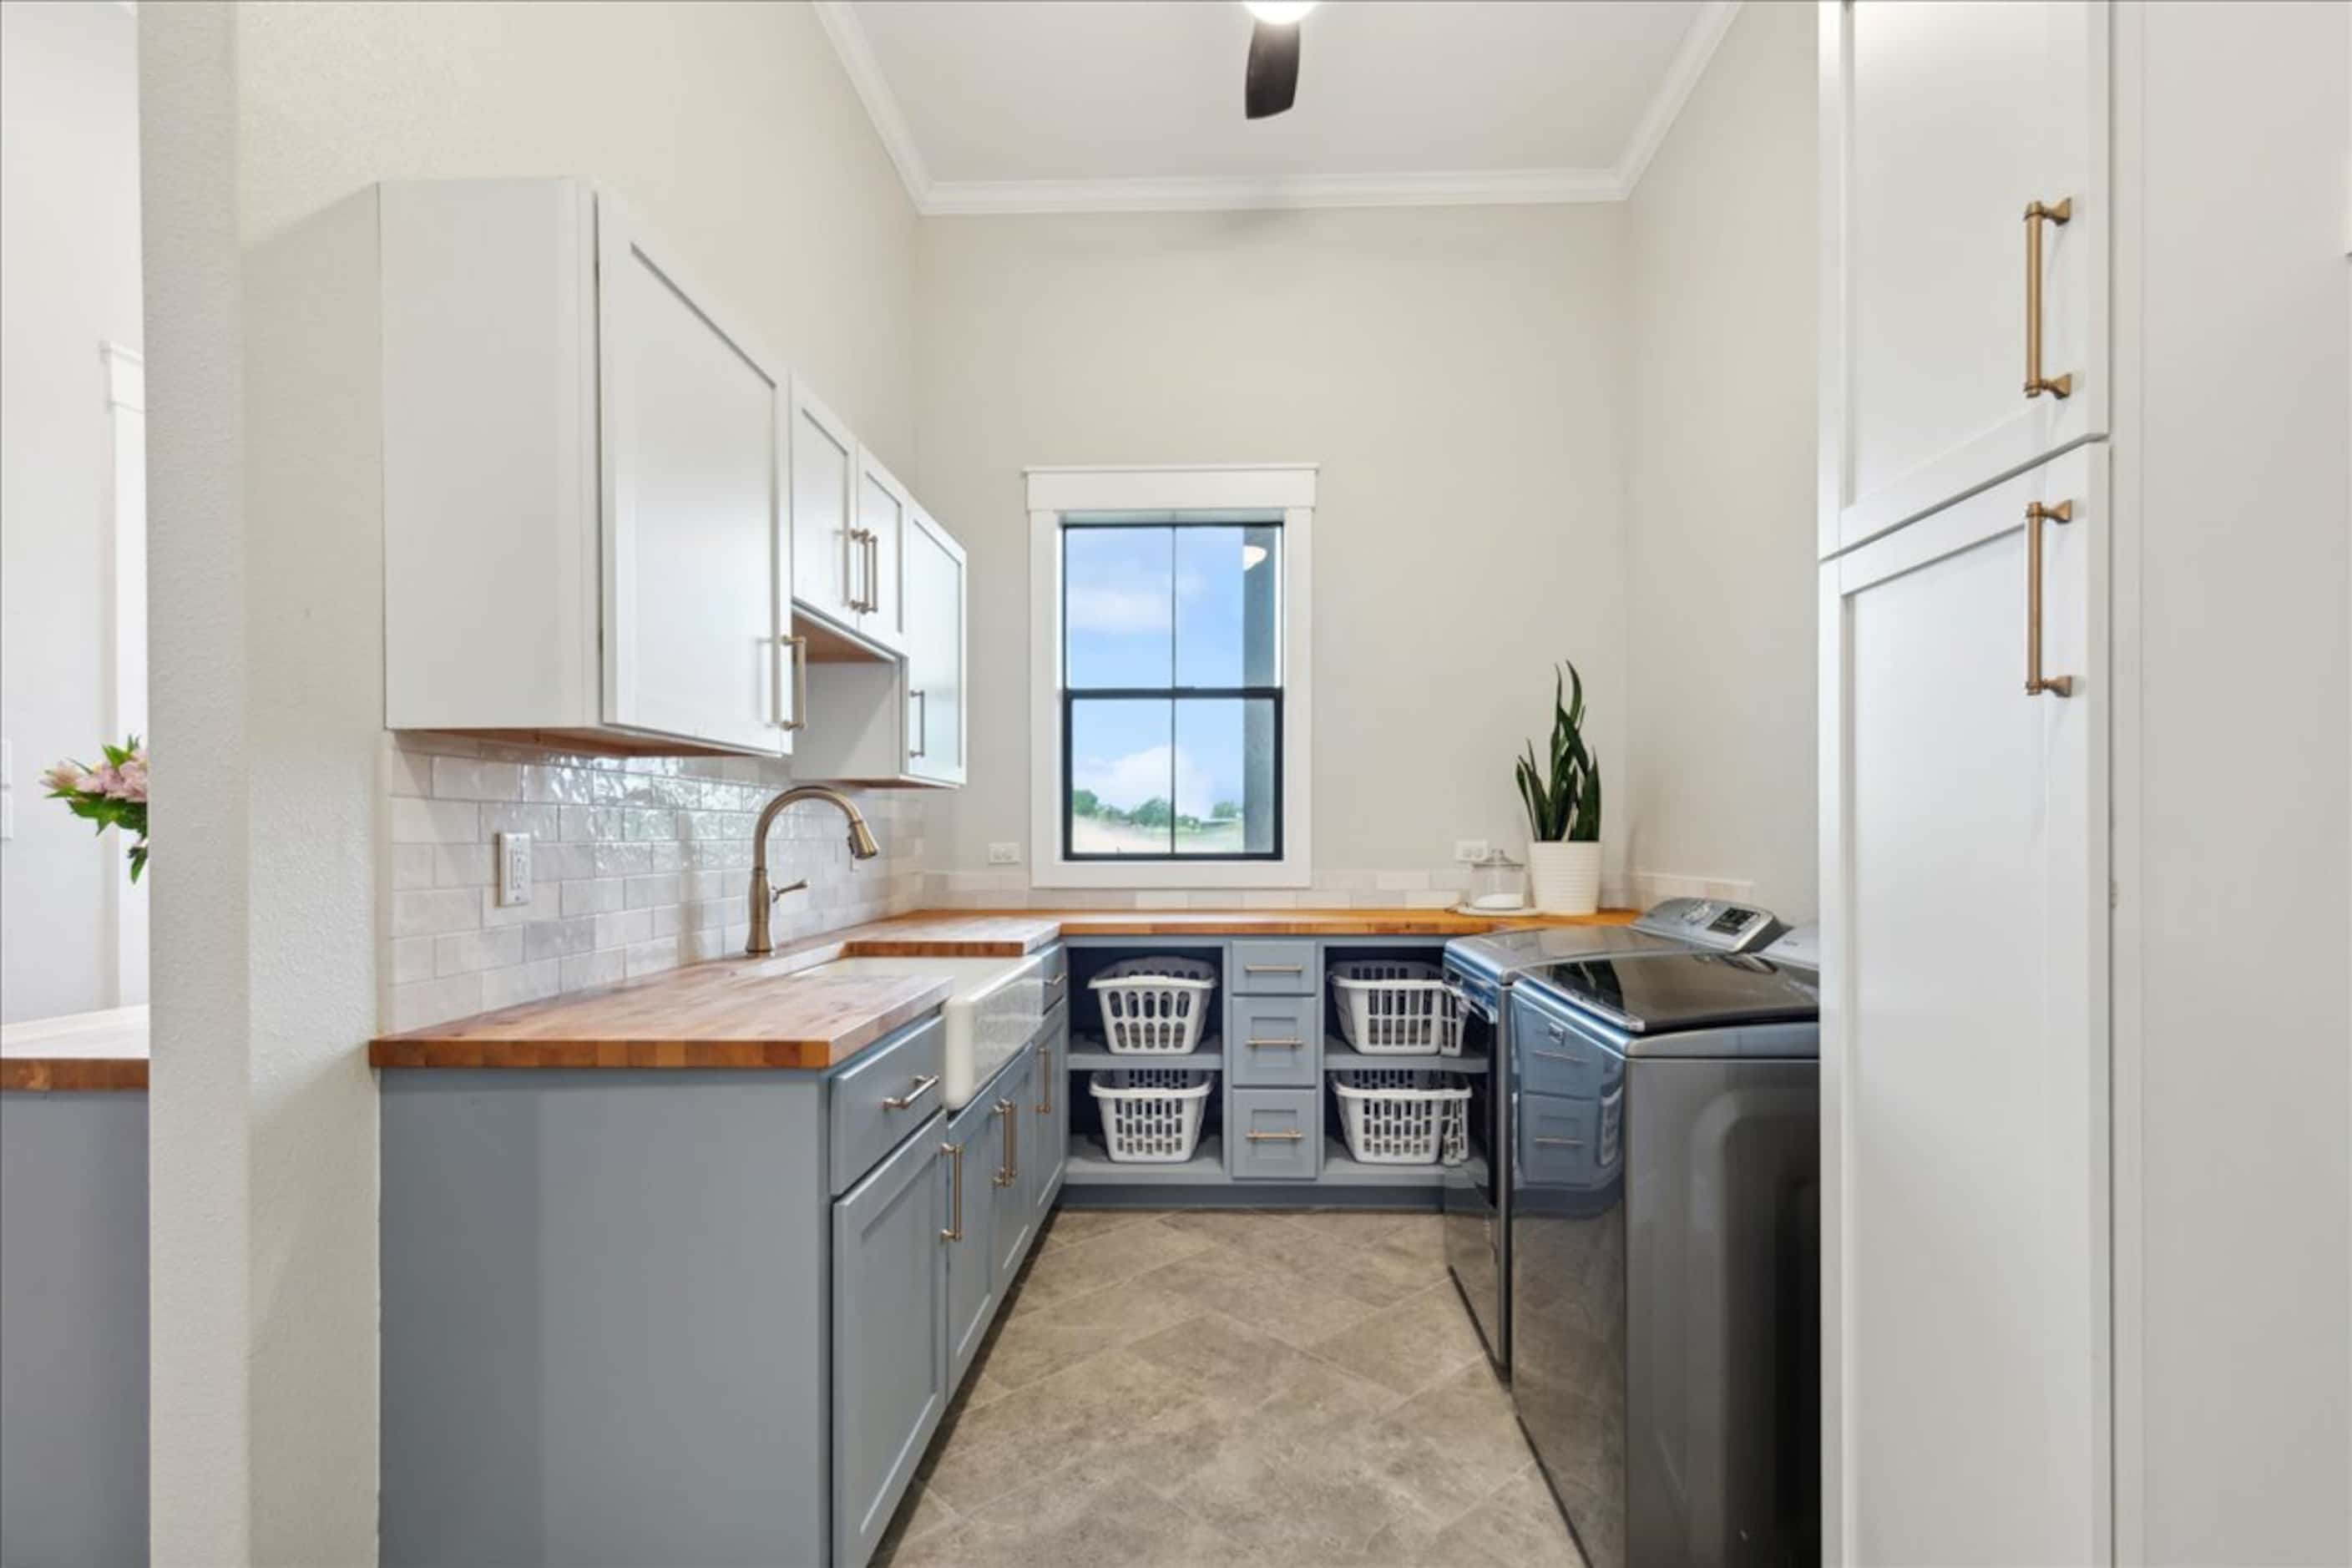 Laundry room with gray and white cabinetry